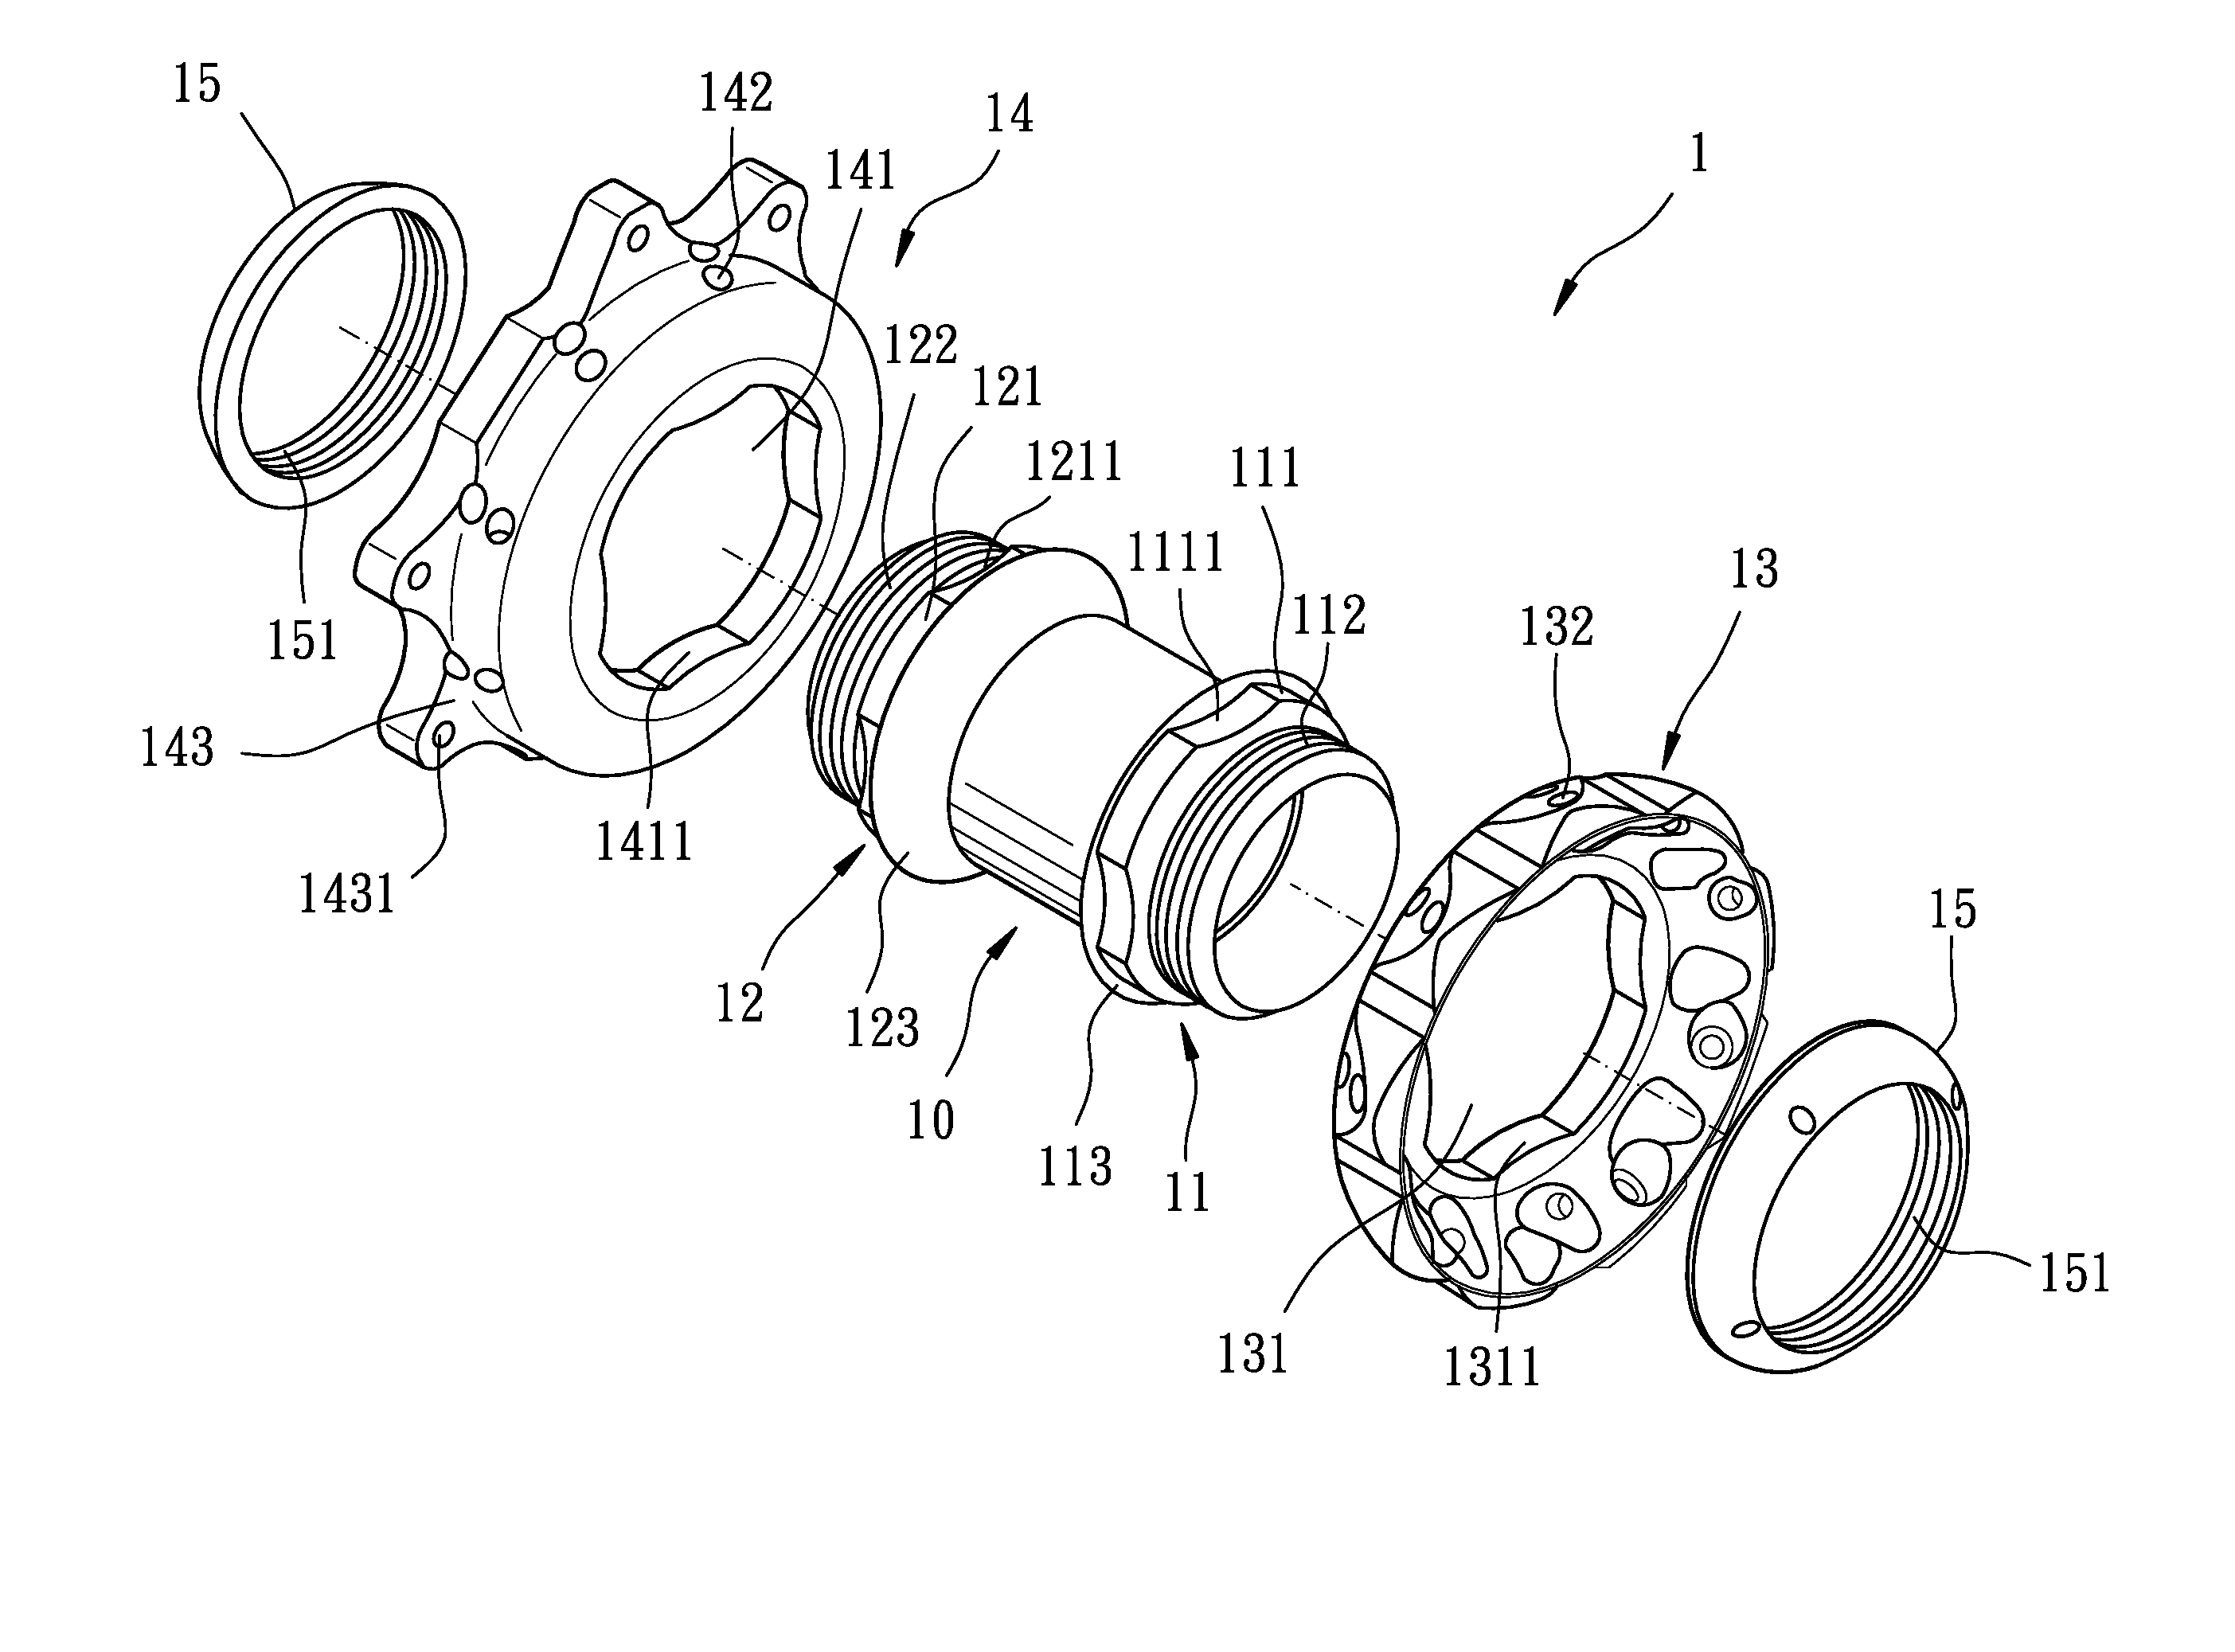 Hub for off-road motorcycle